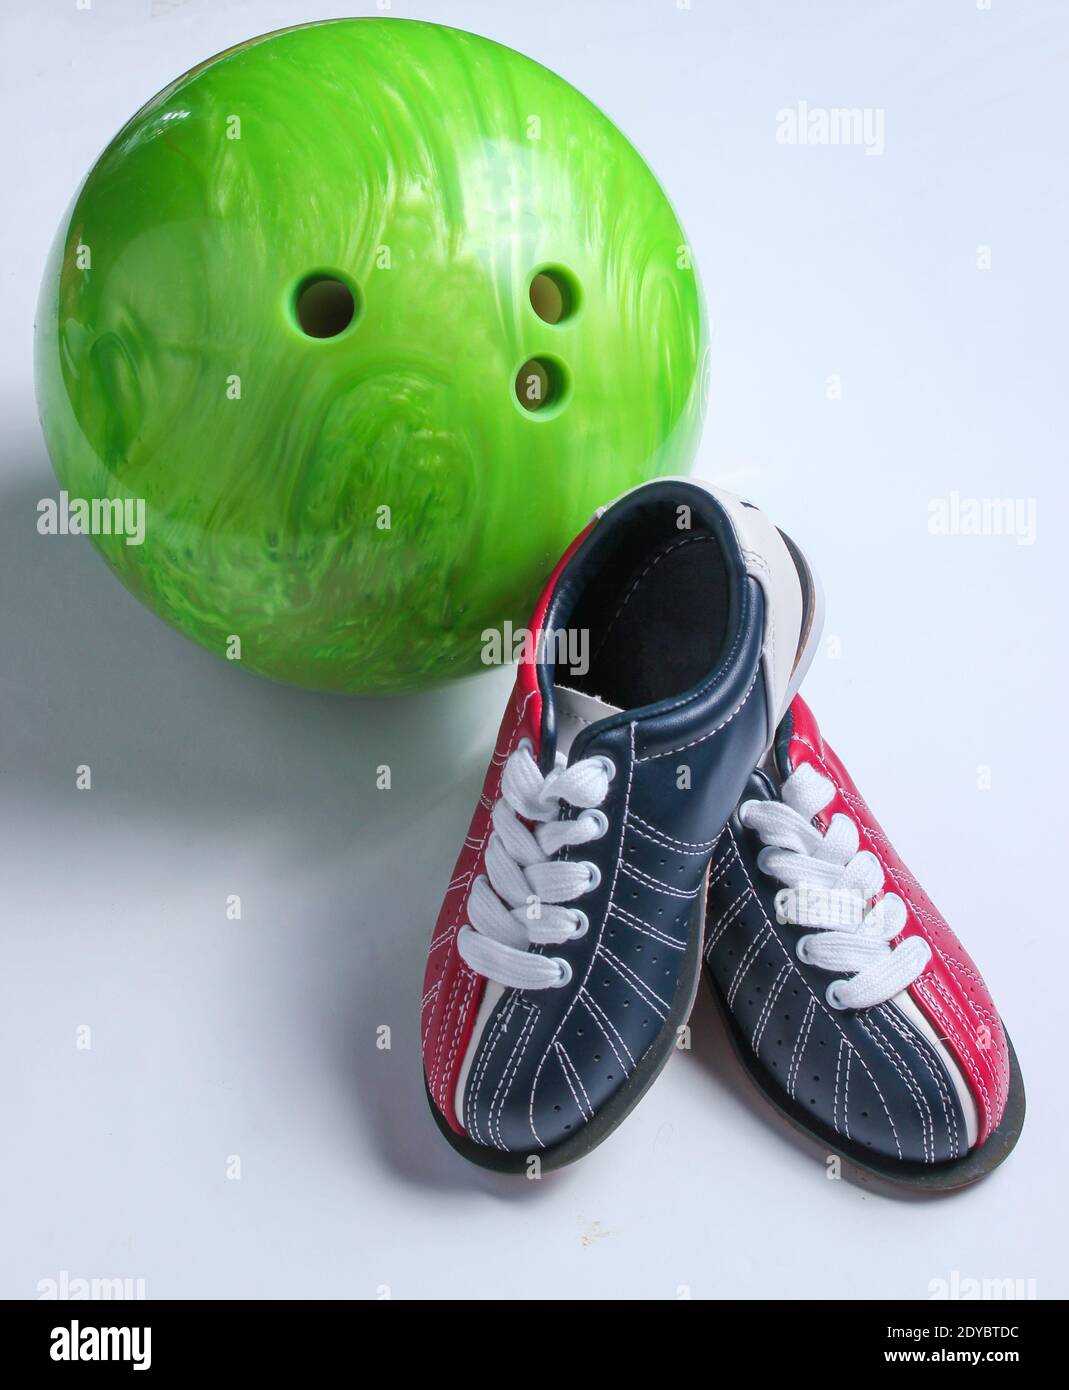 Bowling shoes and bowling ball on white background. Indoor family sports. Minimalism Stock Photo